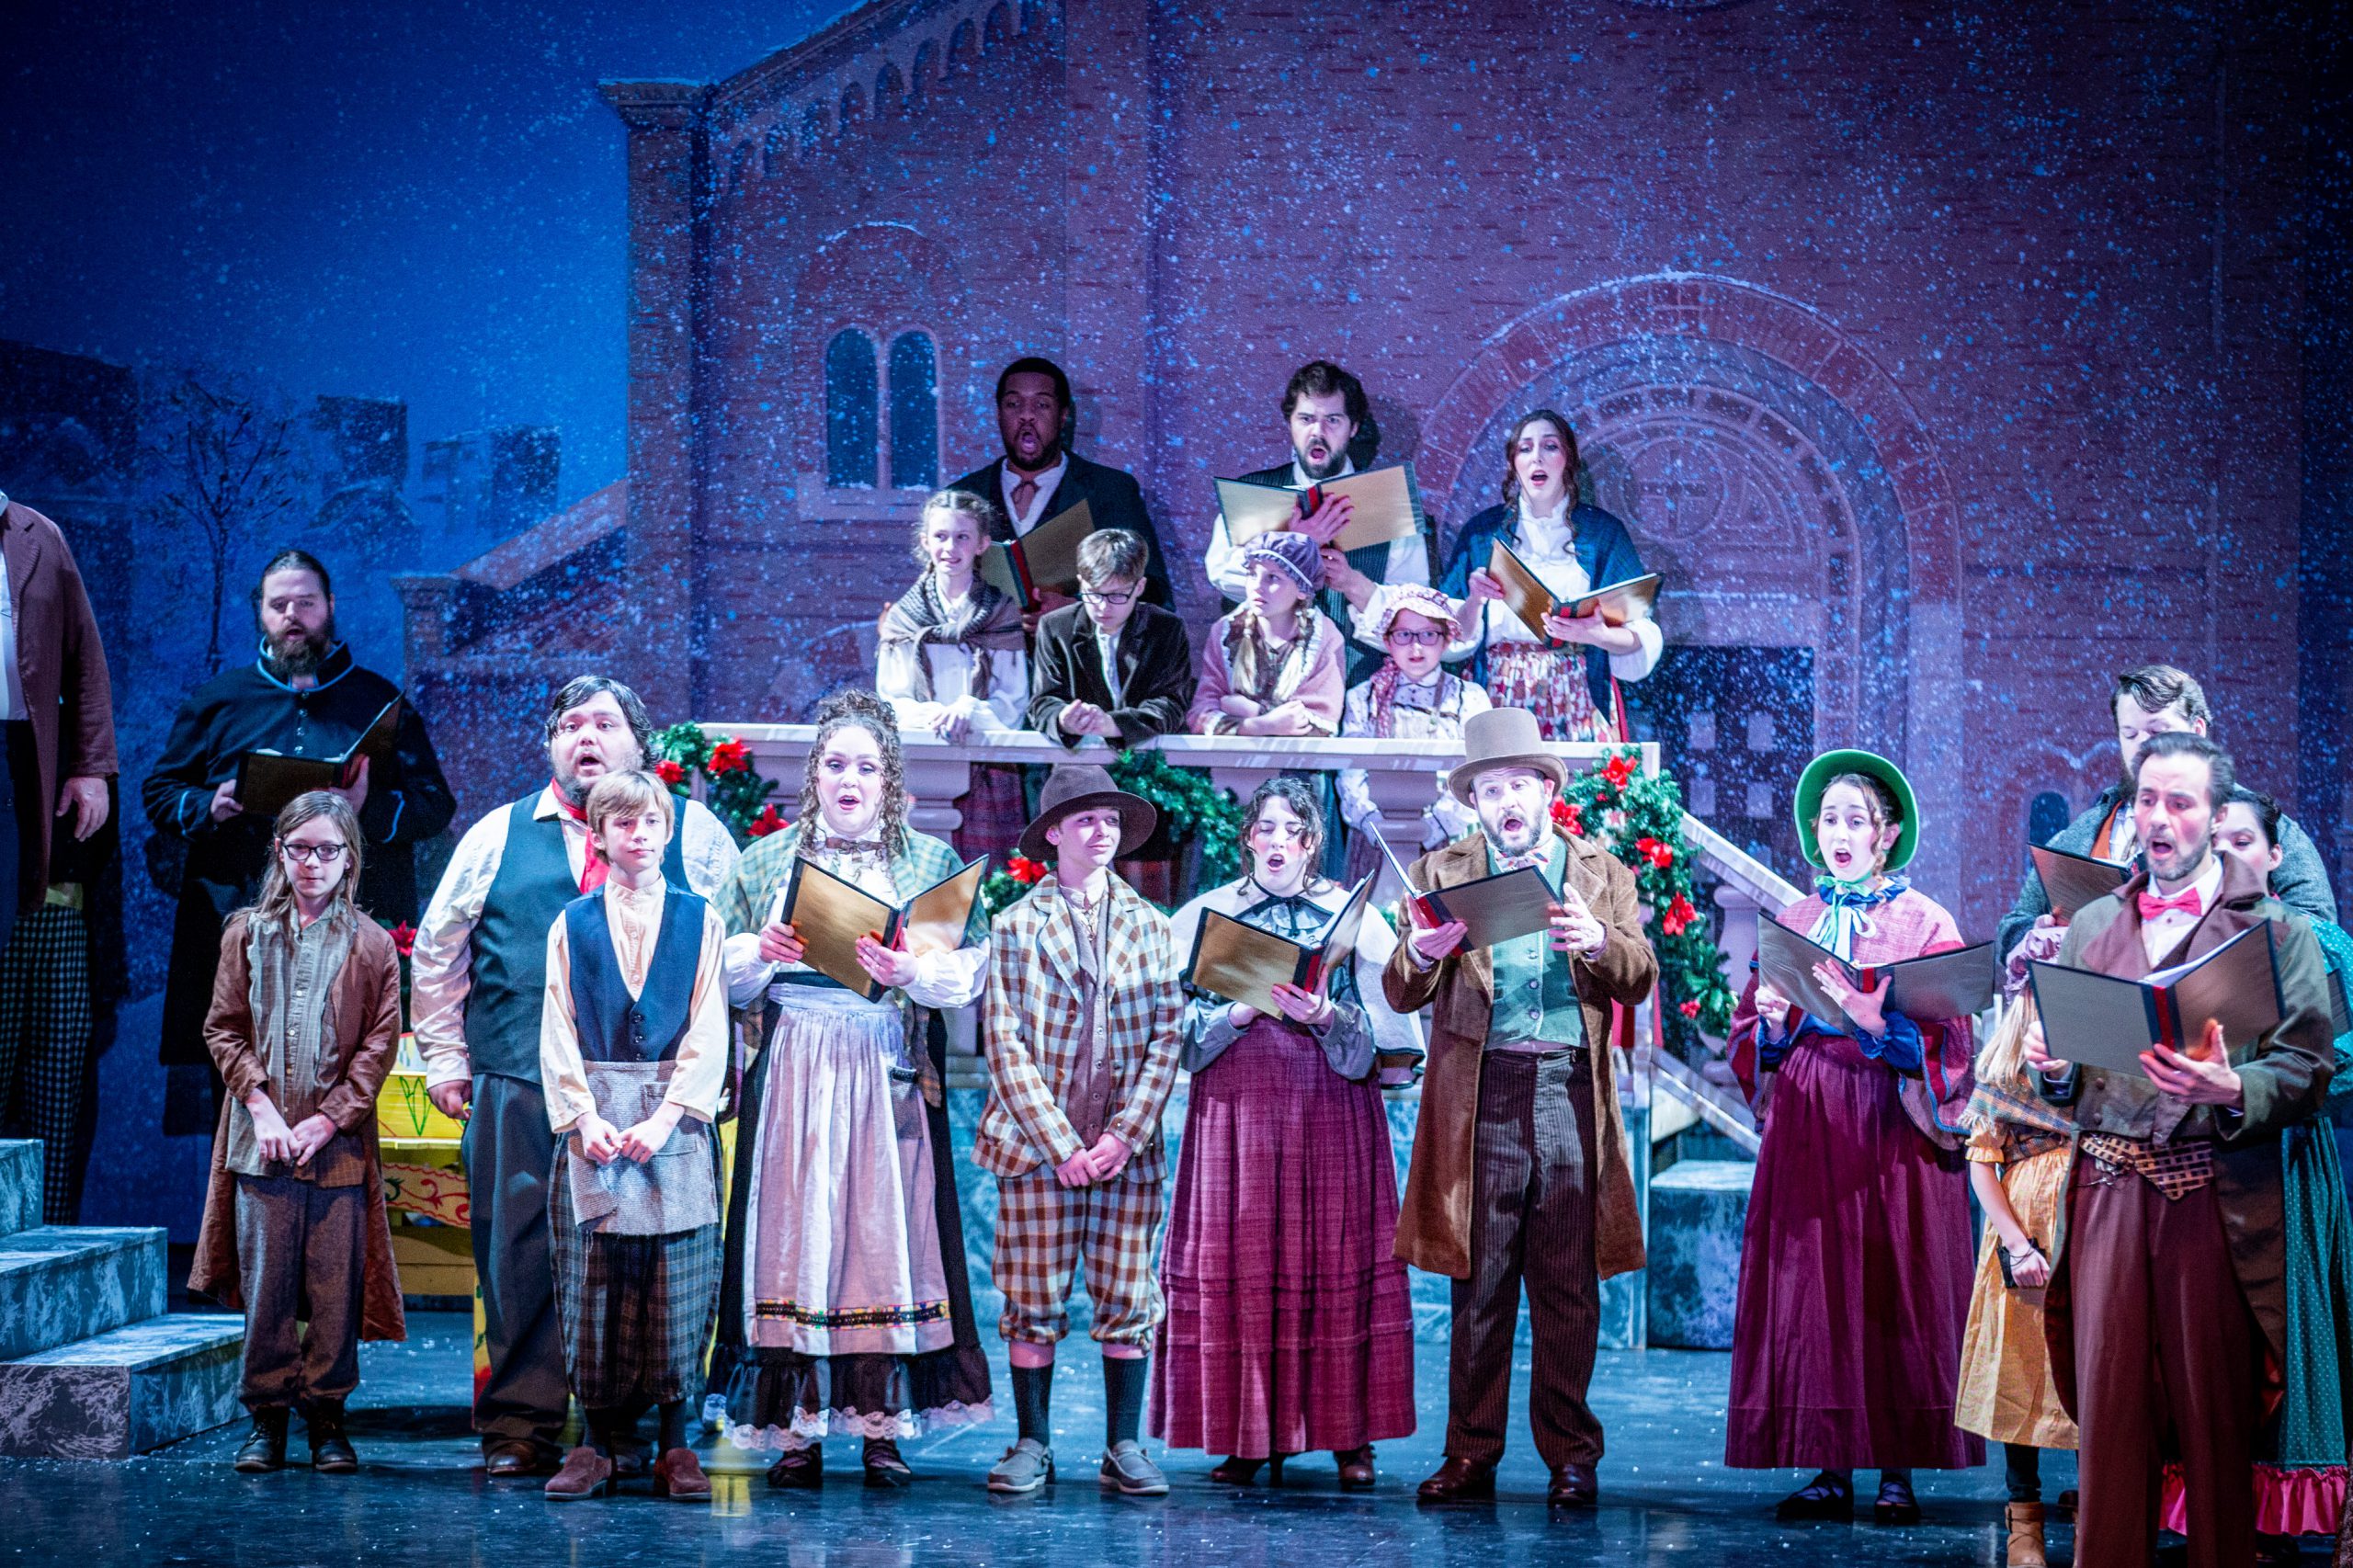 Merry Christmas from Winter Opera St. Louis!